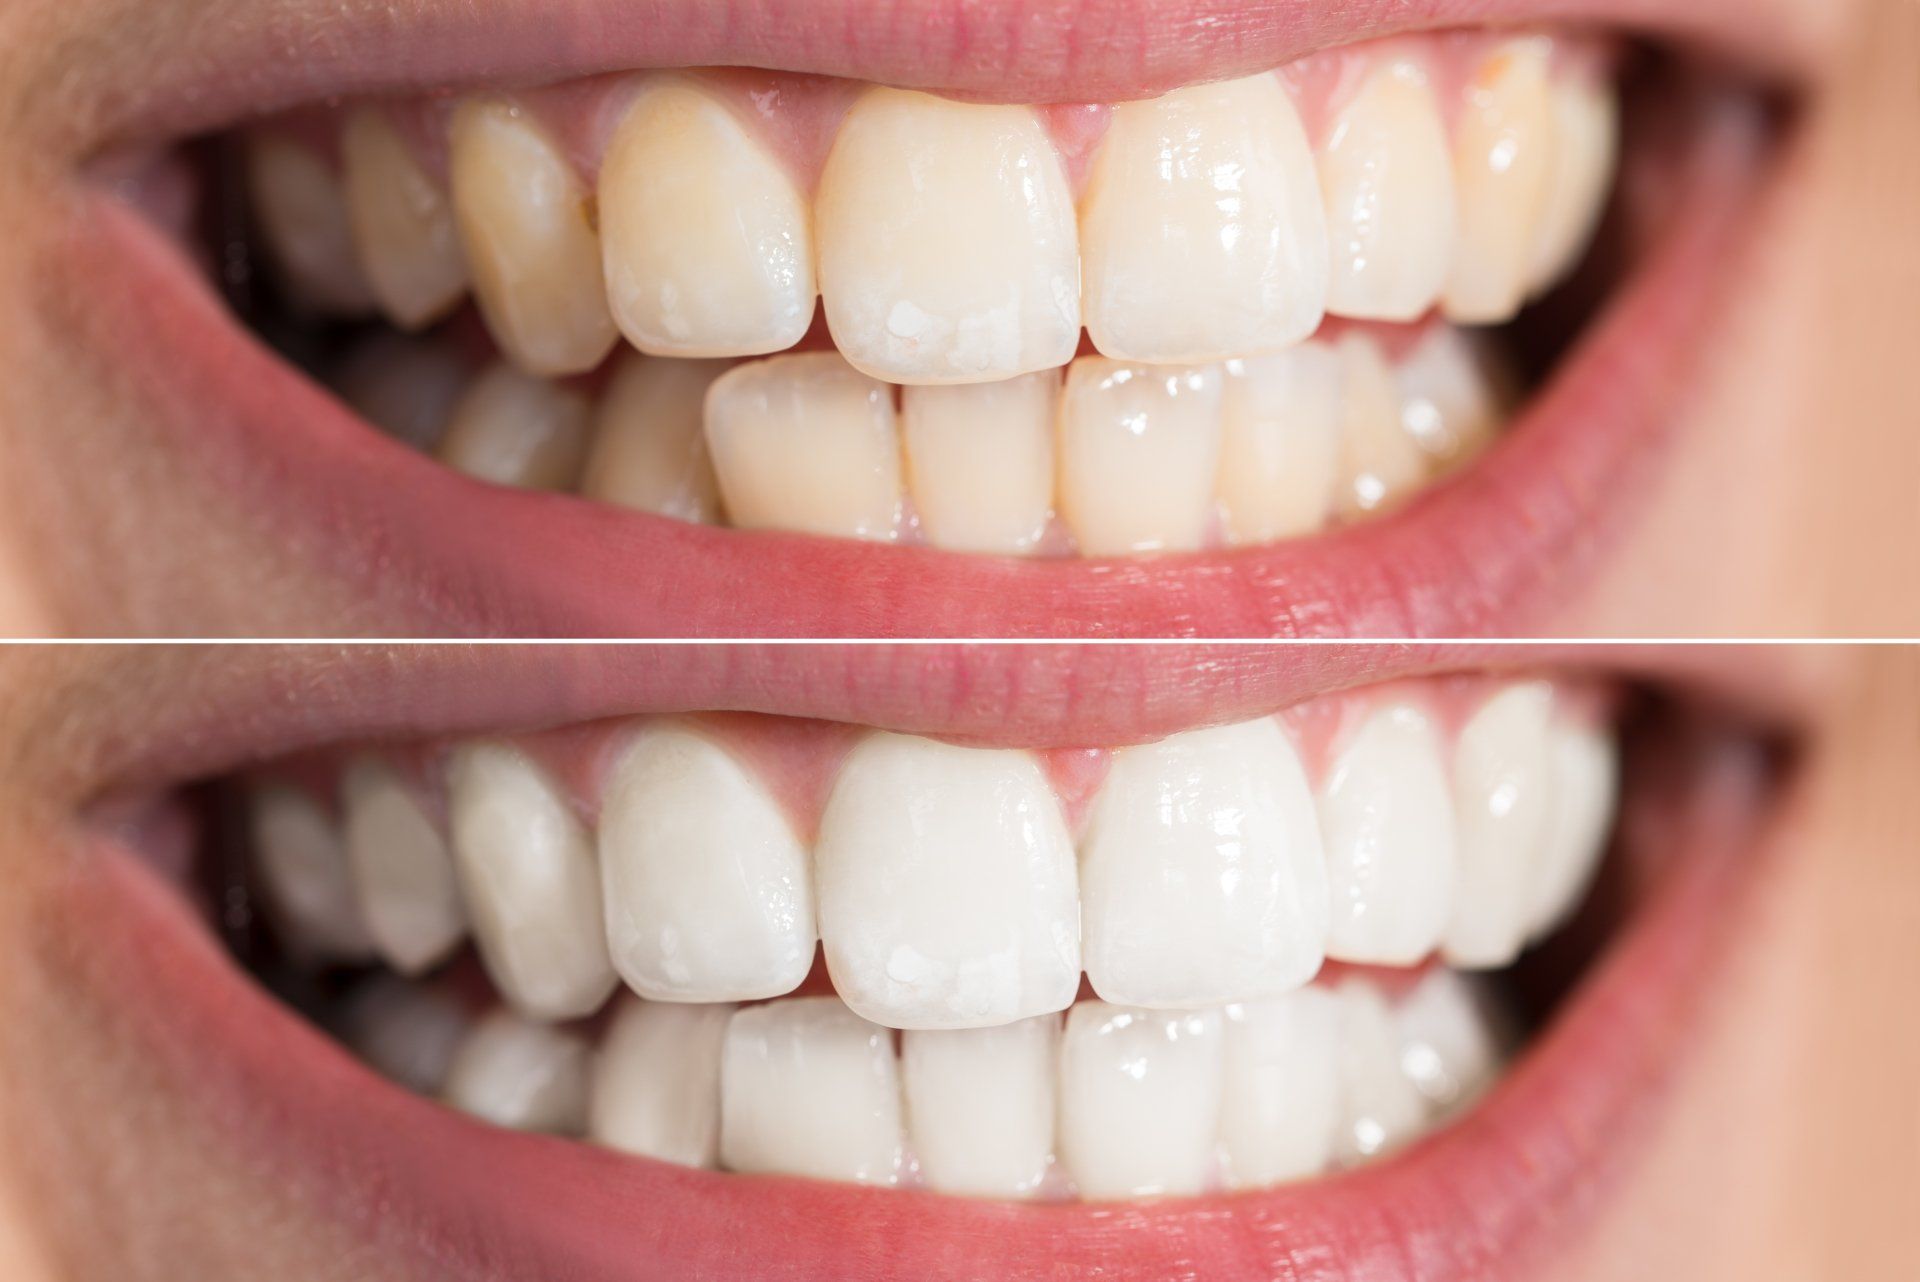 Dosmetic Dentistry —Teeth Before And After Whitening in Richmond, VA